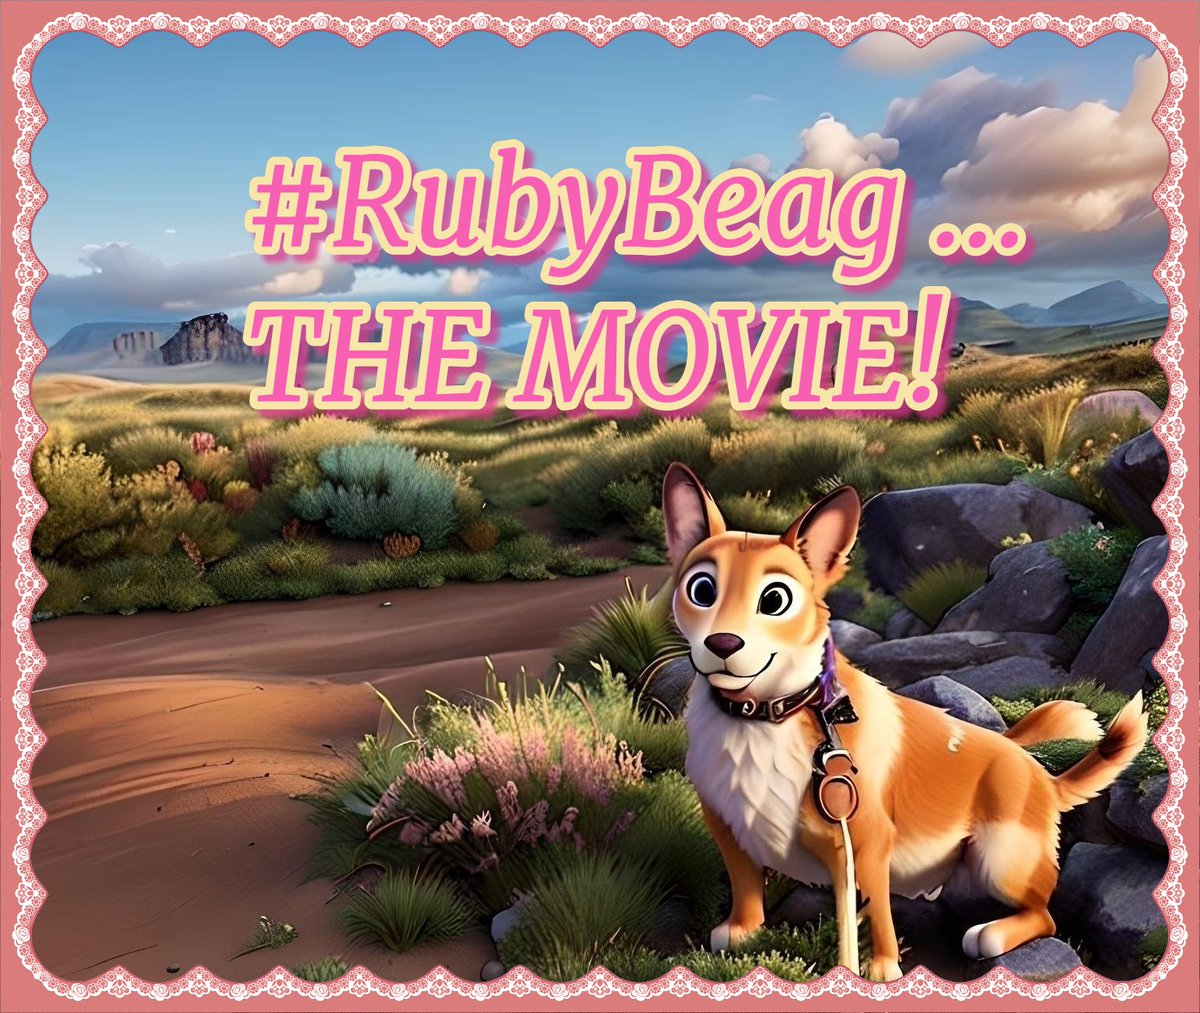 @Lalavande33 CONGRATULATIONS!!! 
100 Days of Walking!!!

Next has to be 'RubyBeag ~ THE MOVIE!' ♥

#RubyBeag #dogs #walking #Donegal 
#Ireland #pets #movies #films